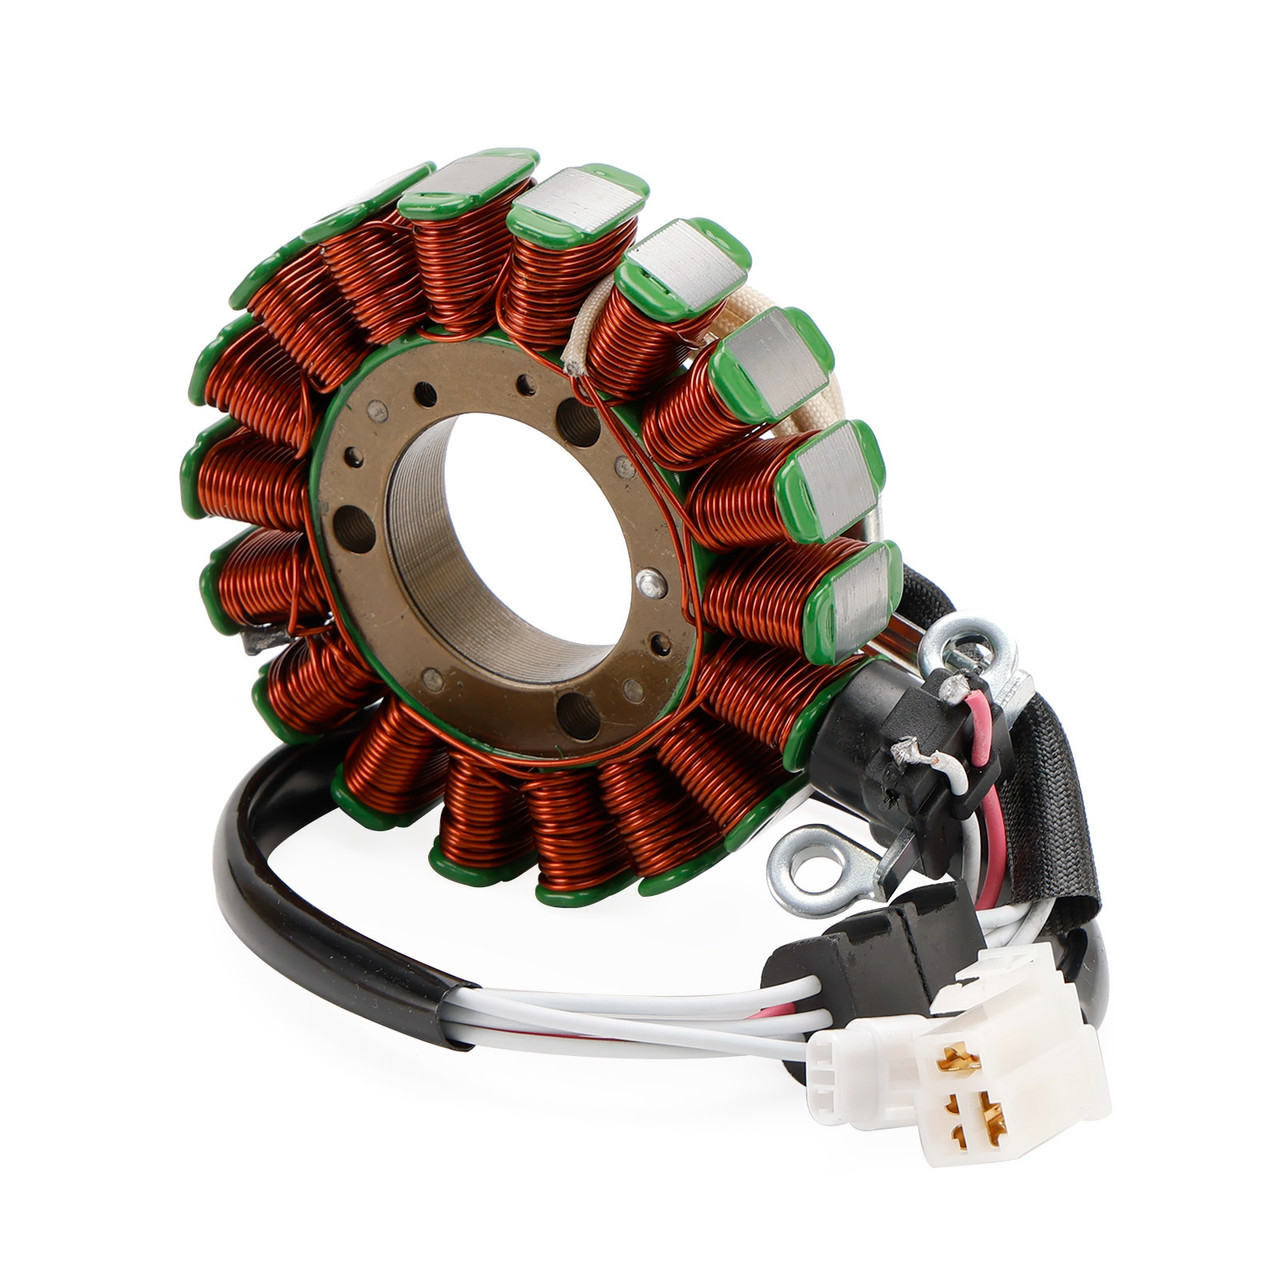 Magneto Stator + Voltage Rectifier + Gasket For Yamaha YZF-R 125 YZF-R125 10-13